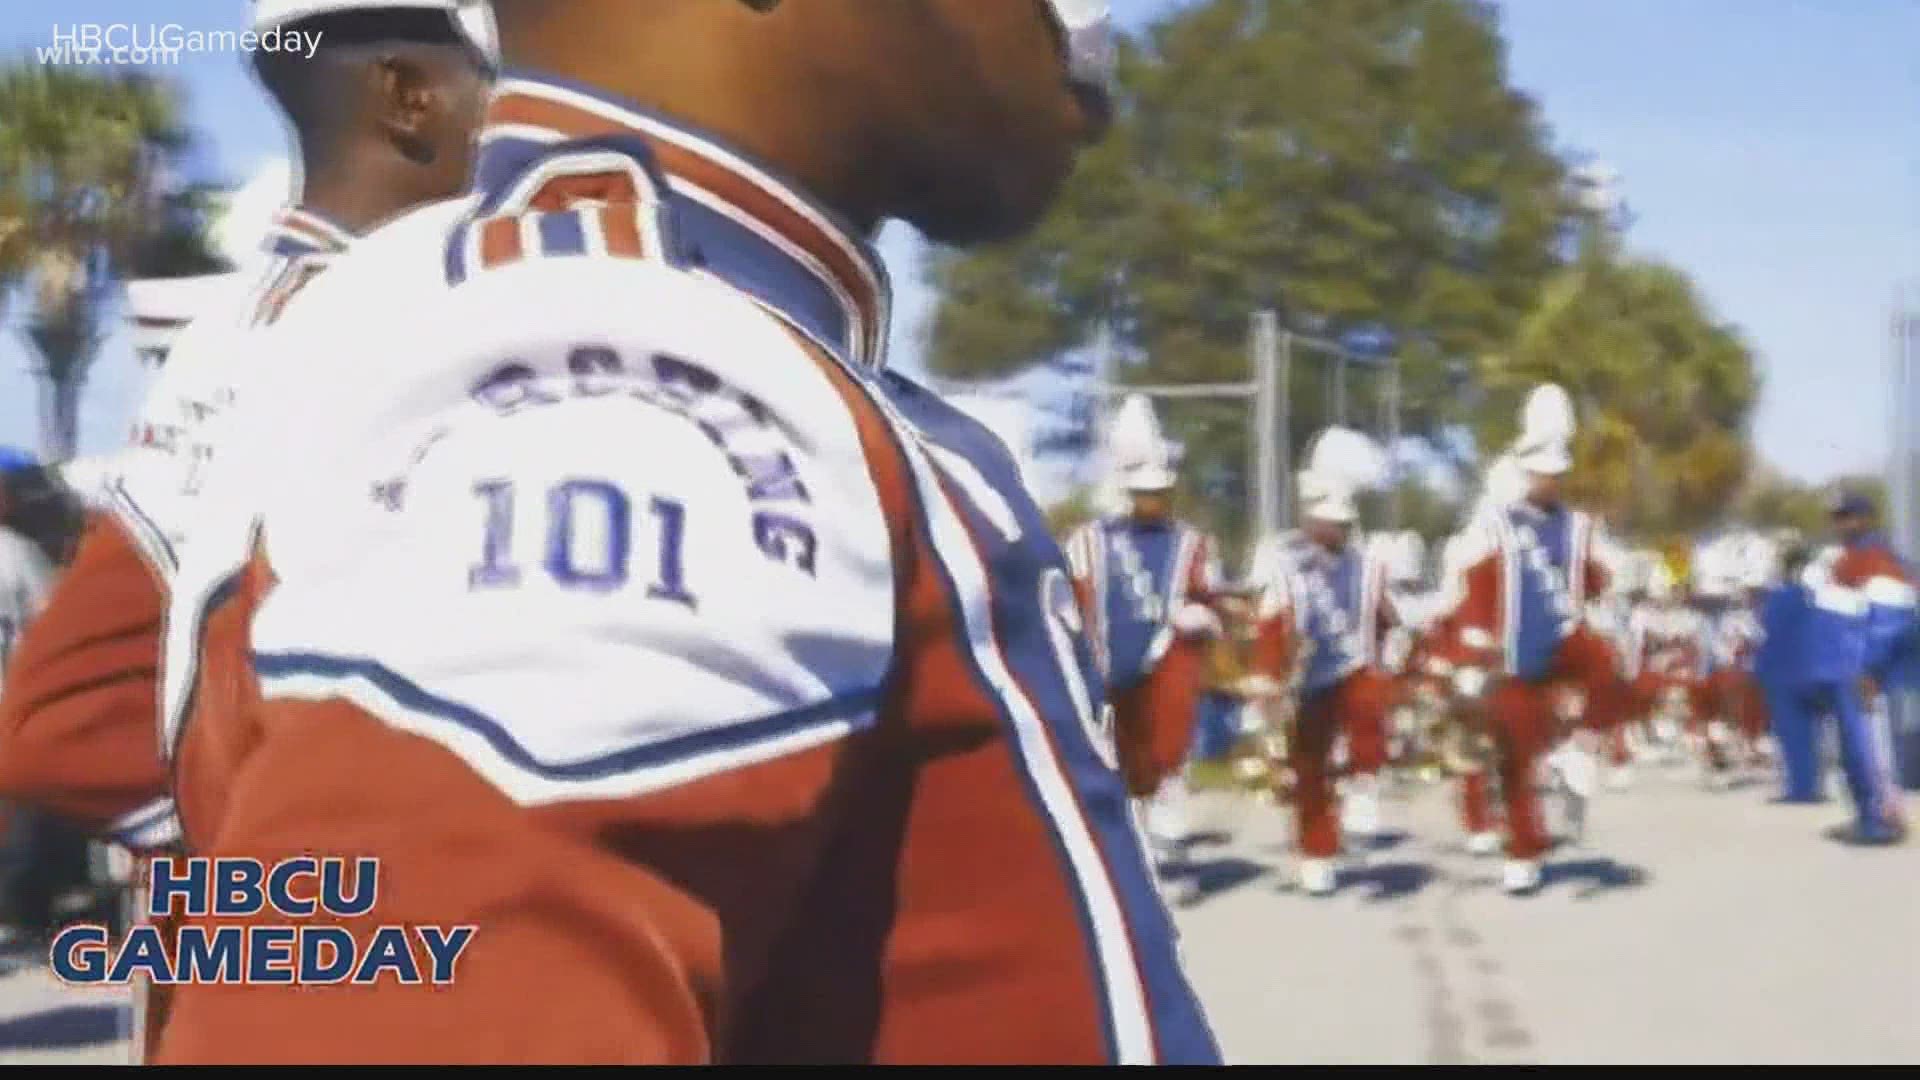 South Carolina State University's Marching 101 Band will be among the featured performers during virtual inaugural event.